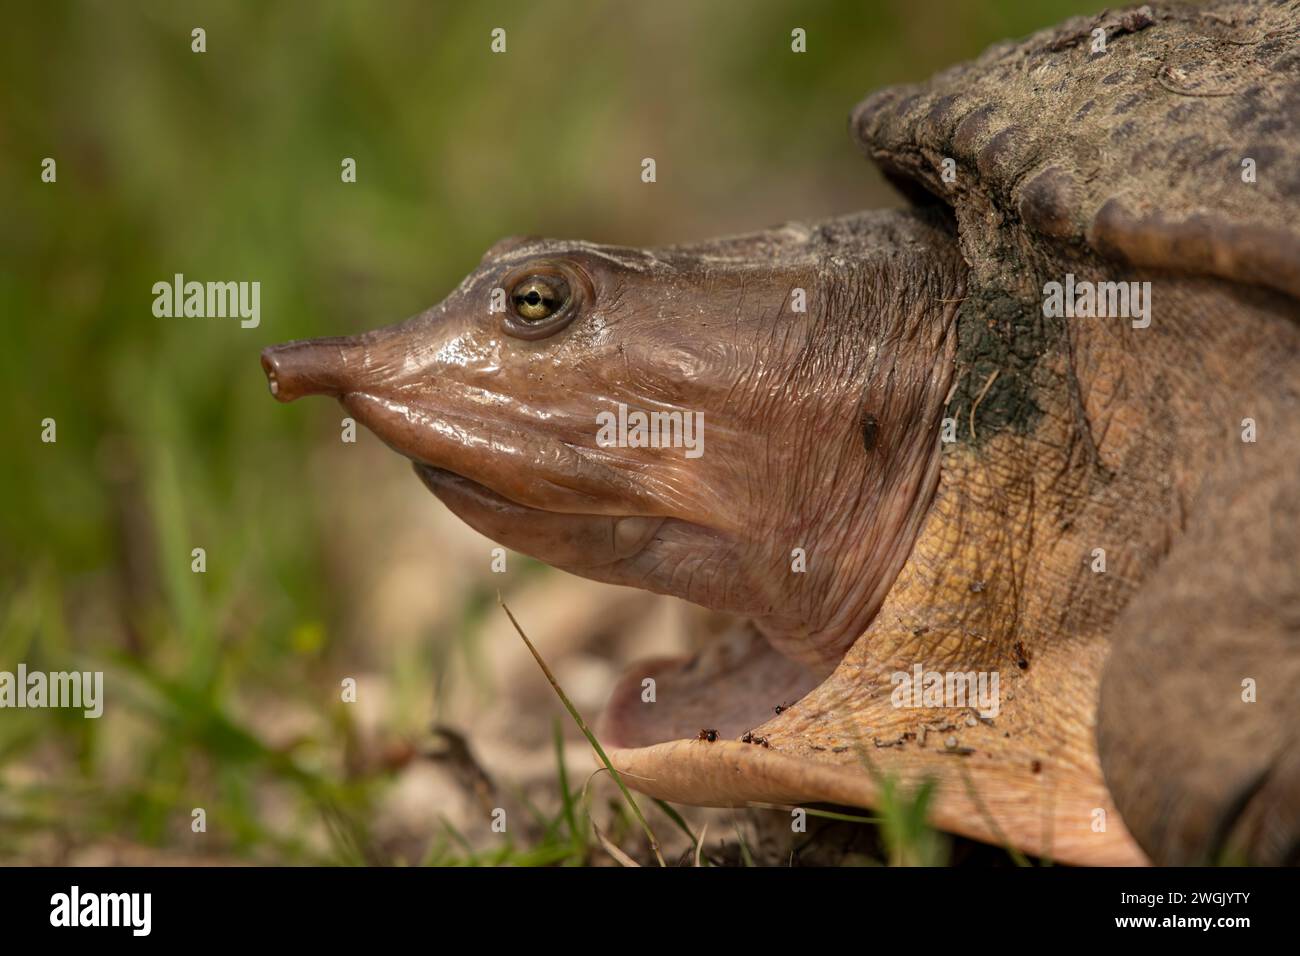 A giant turtle resting on grassy terrain by the water's edge. Stock Photo